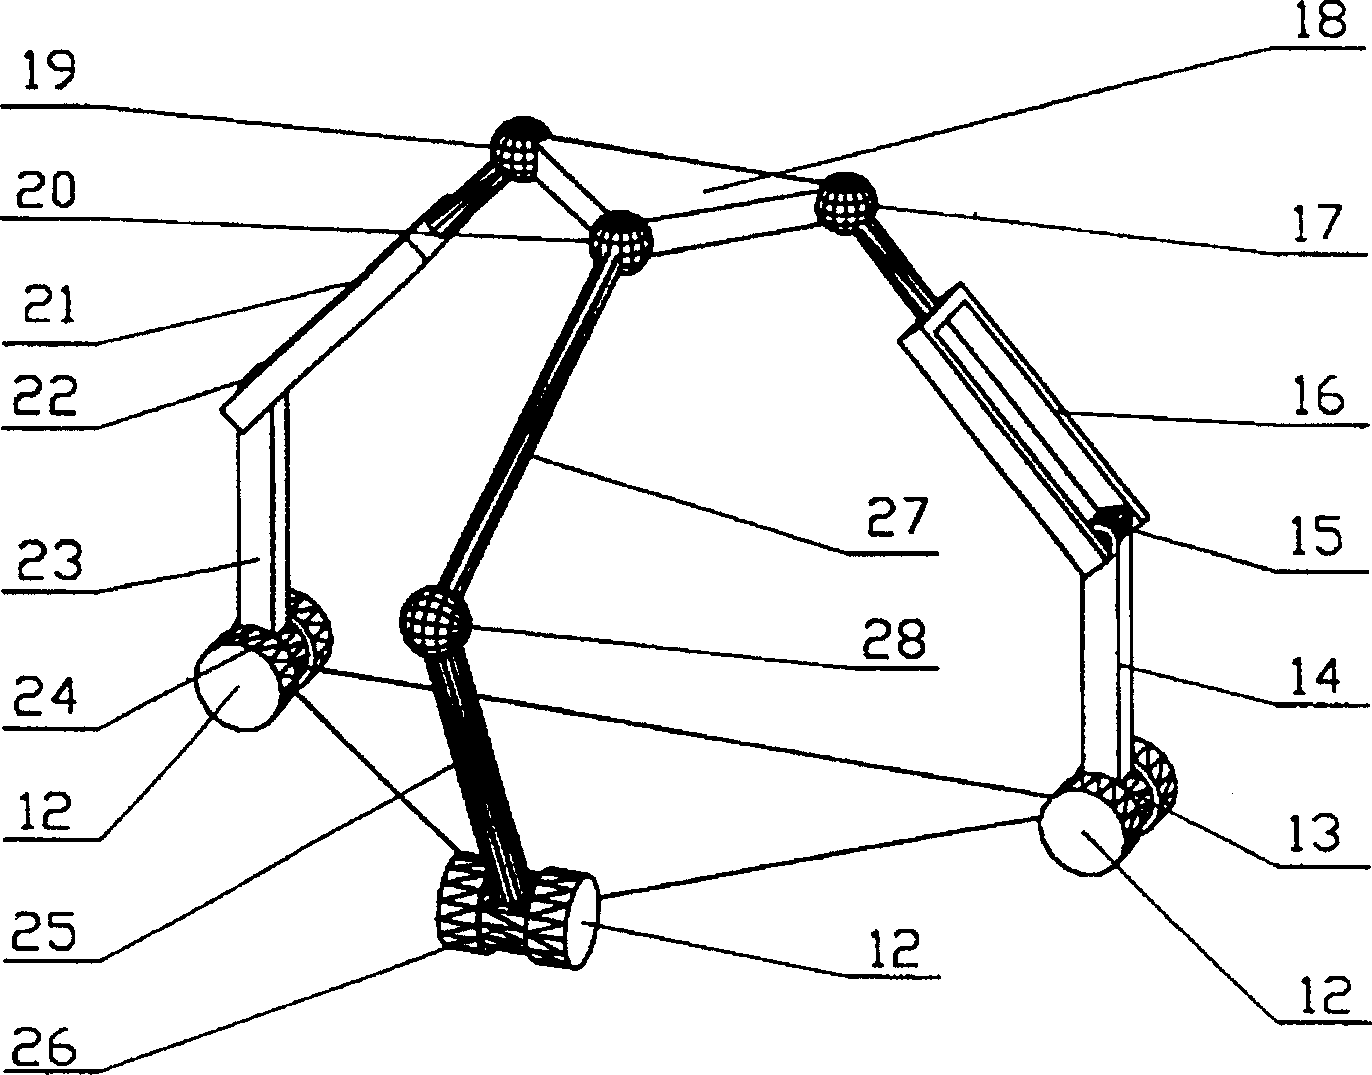 Spatial three-freedom parallel robot mechanism